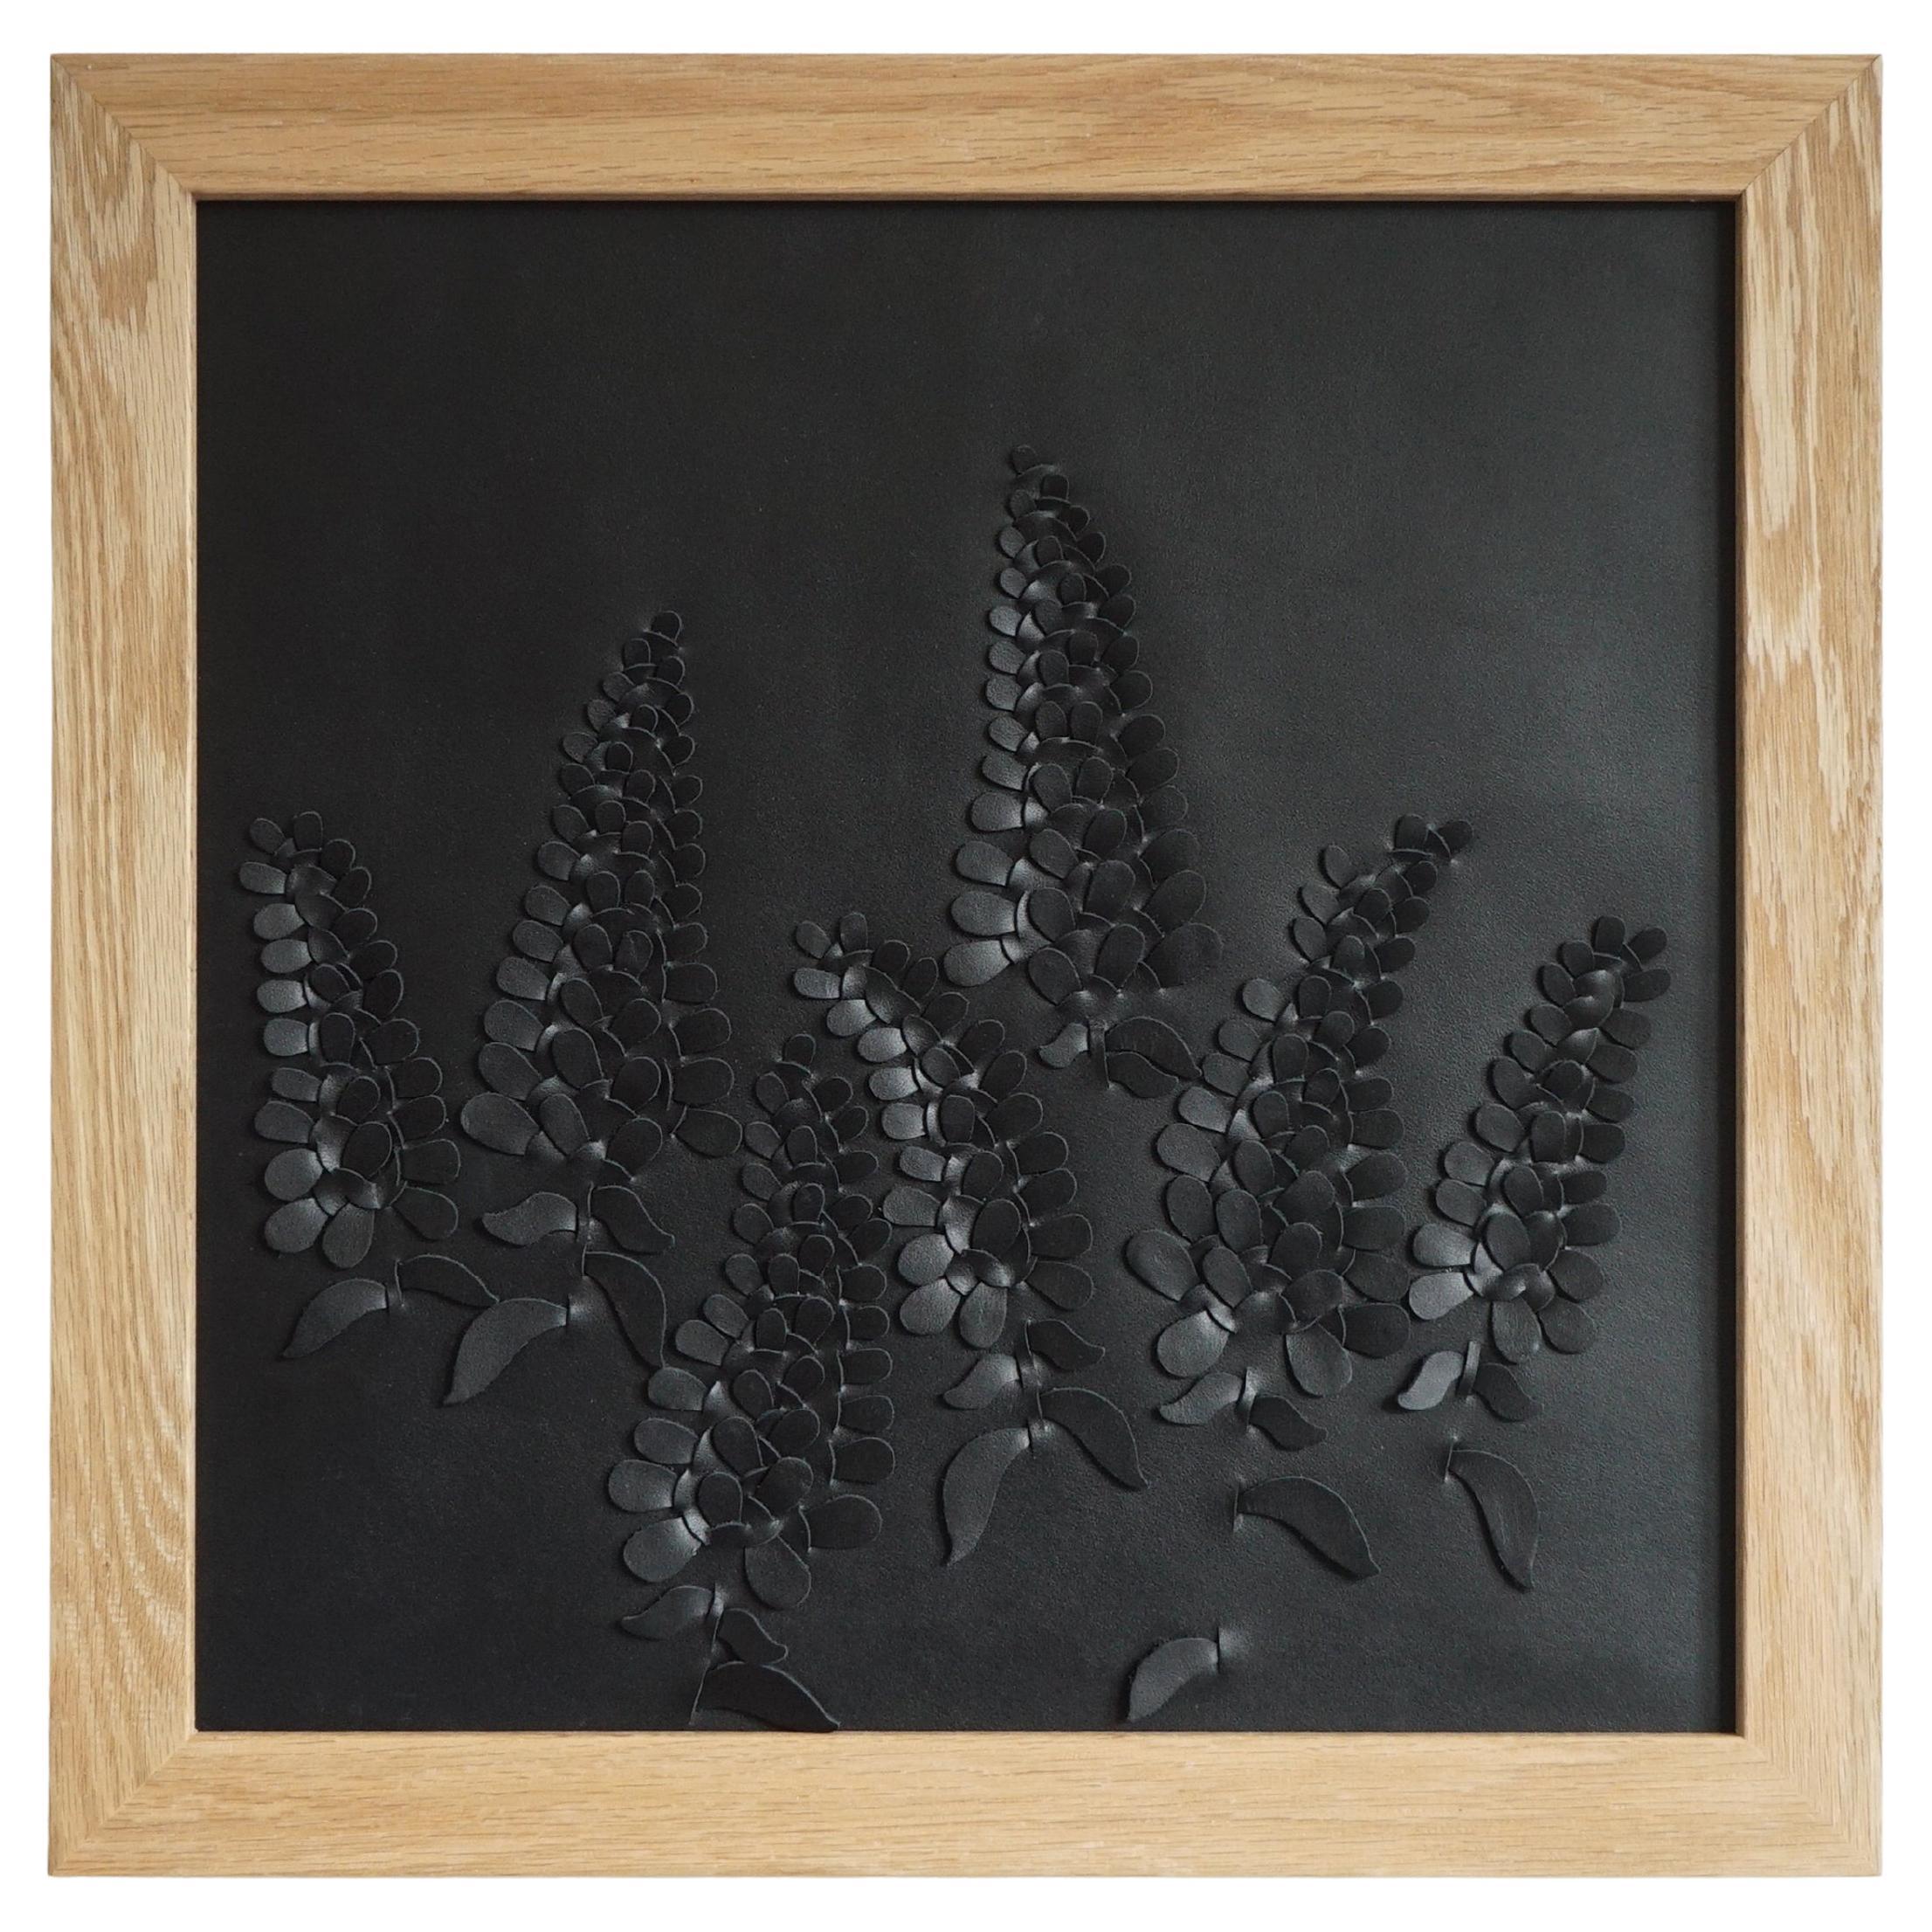 Wisteria a Piece of 3D Sculptural Black Leather Wall Art